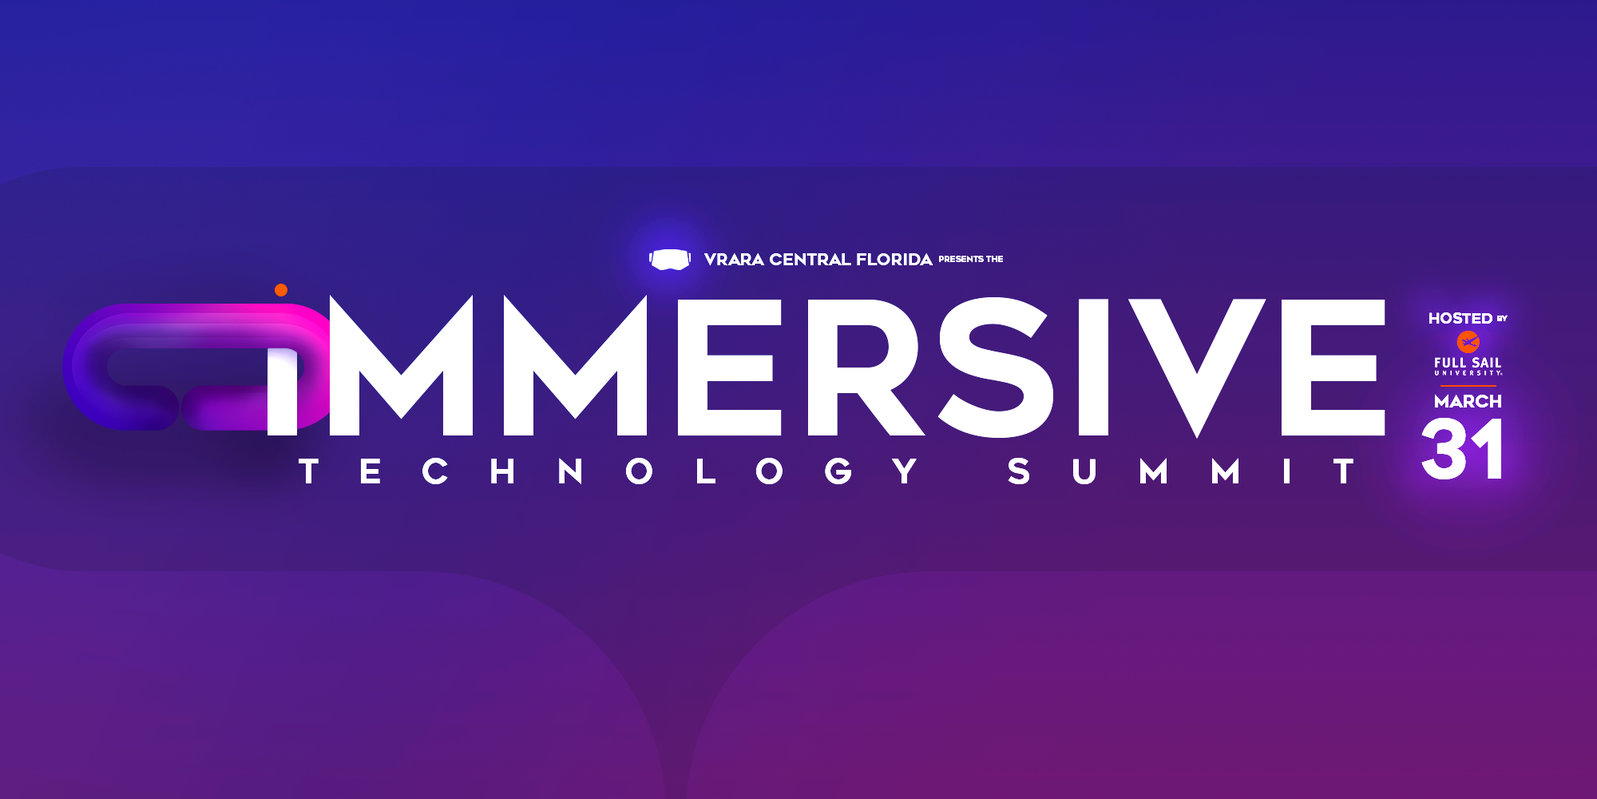 Central Florida Immersive Technology Summit logo on a purple background